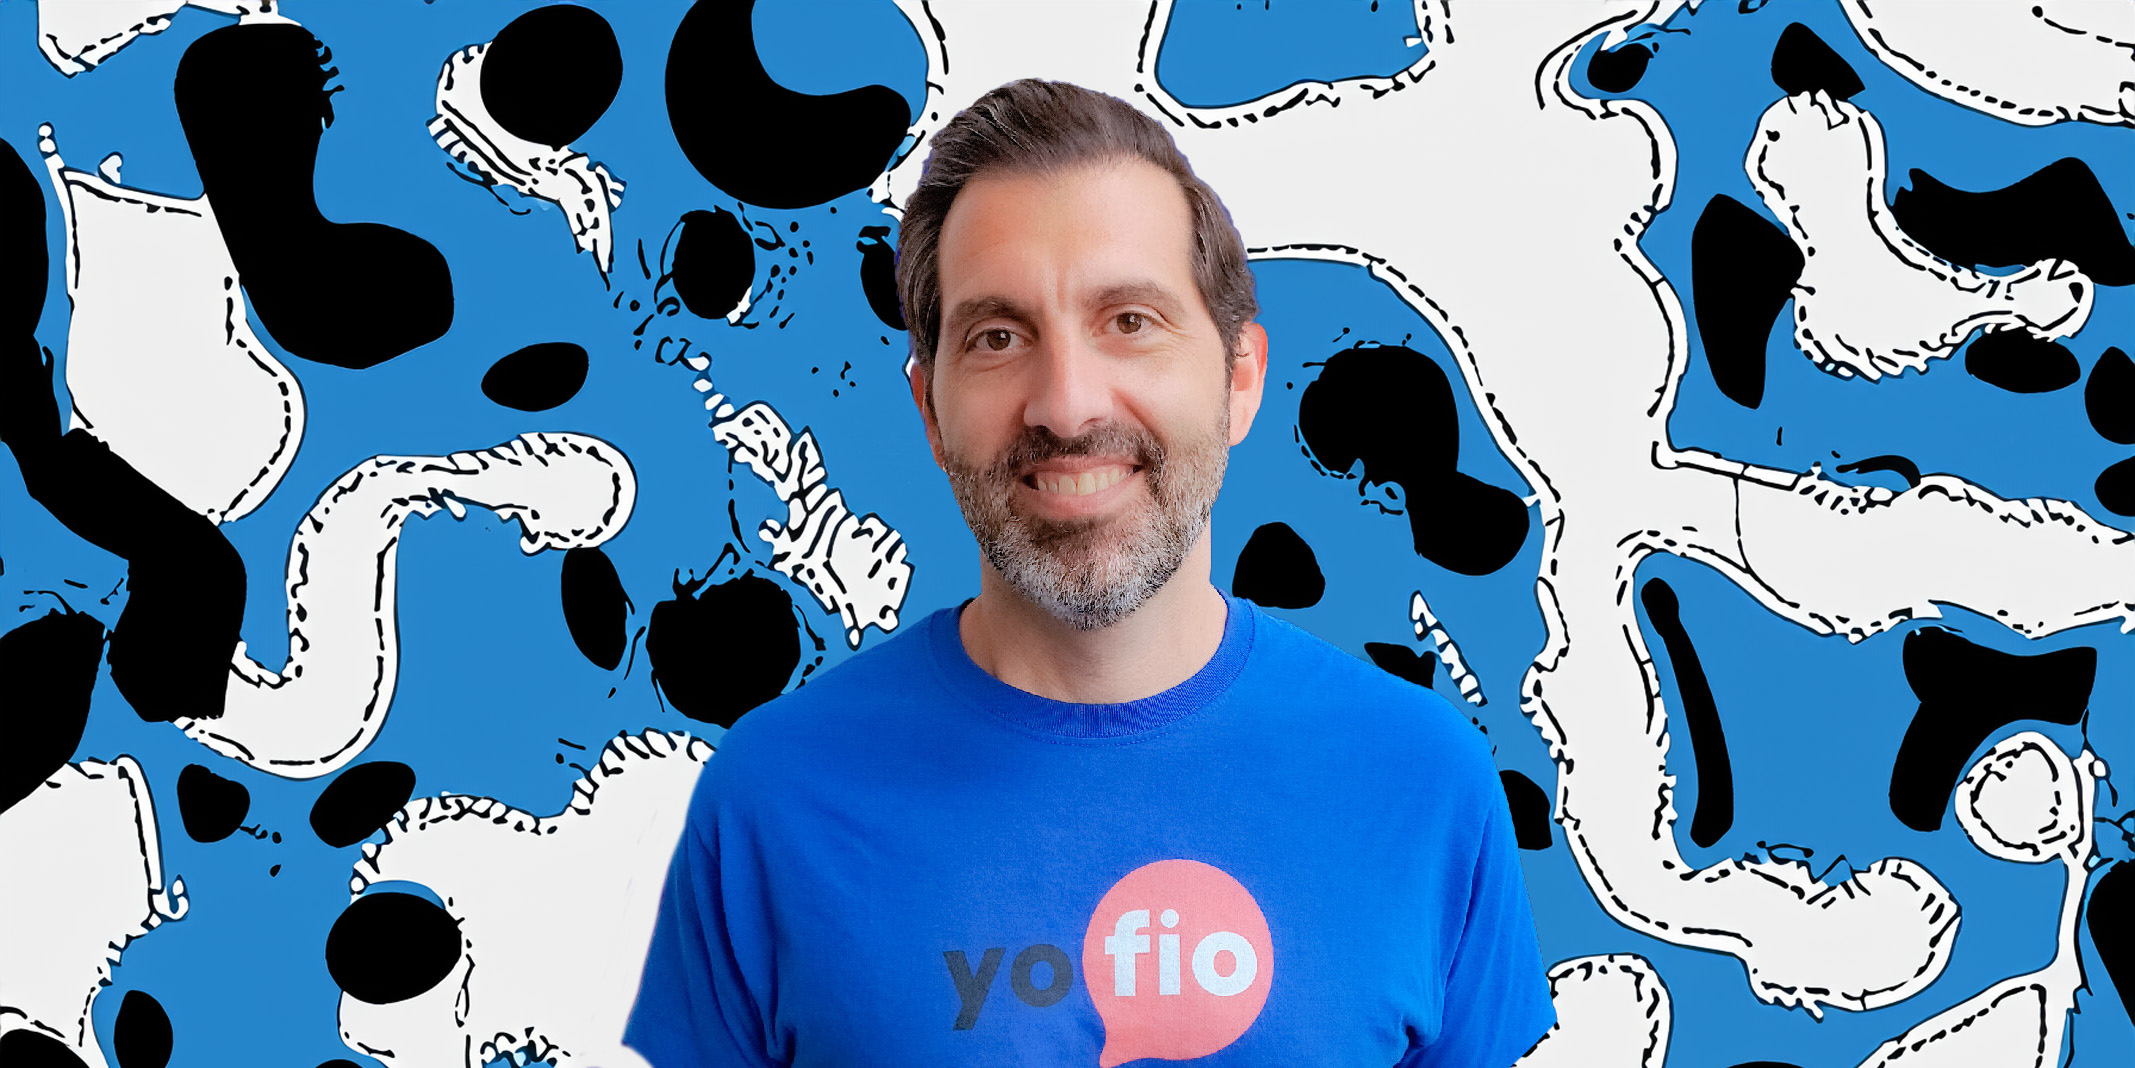 Yofio Secures $10m For Microbusiness Growth In Mexico